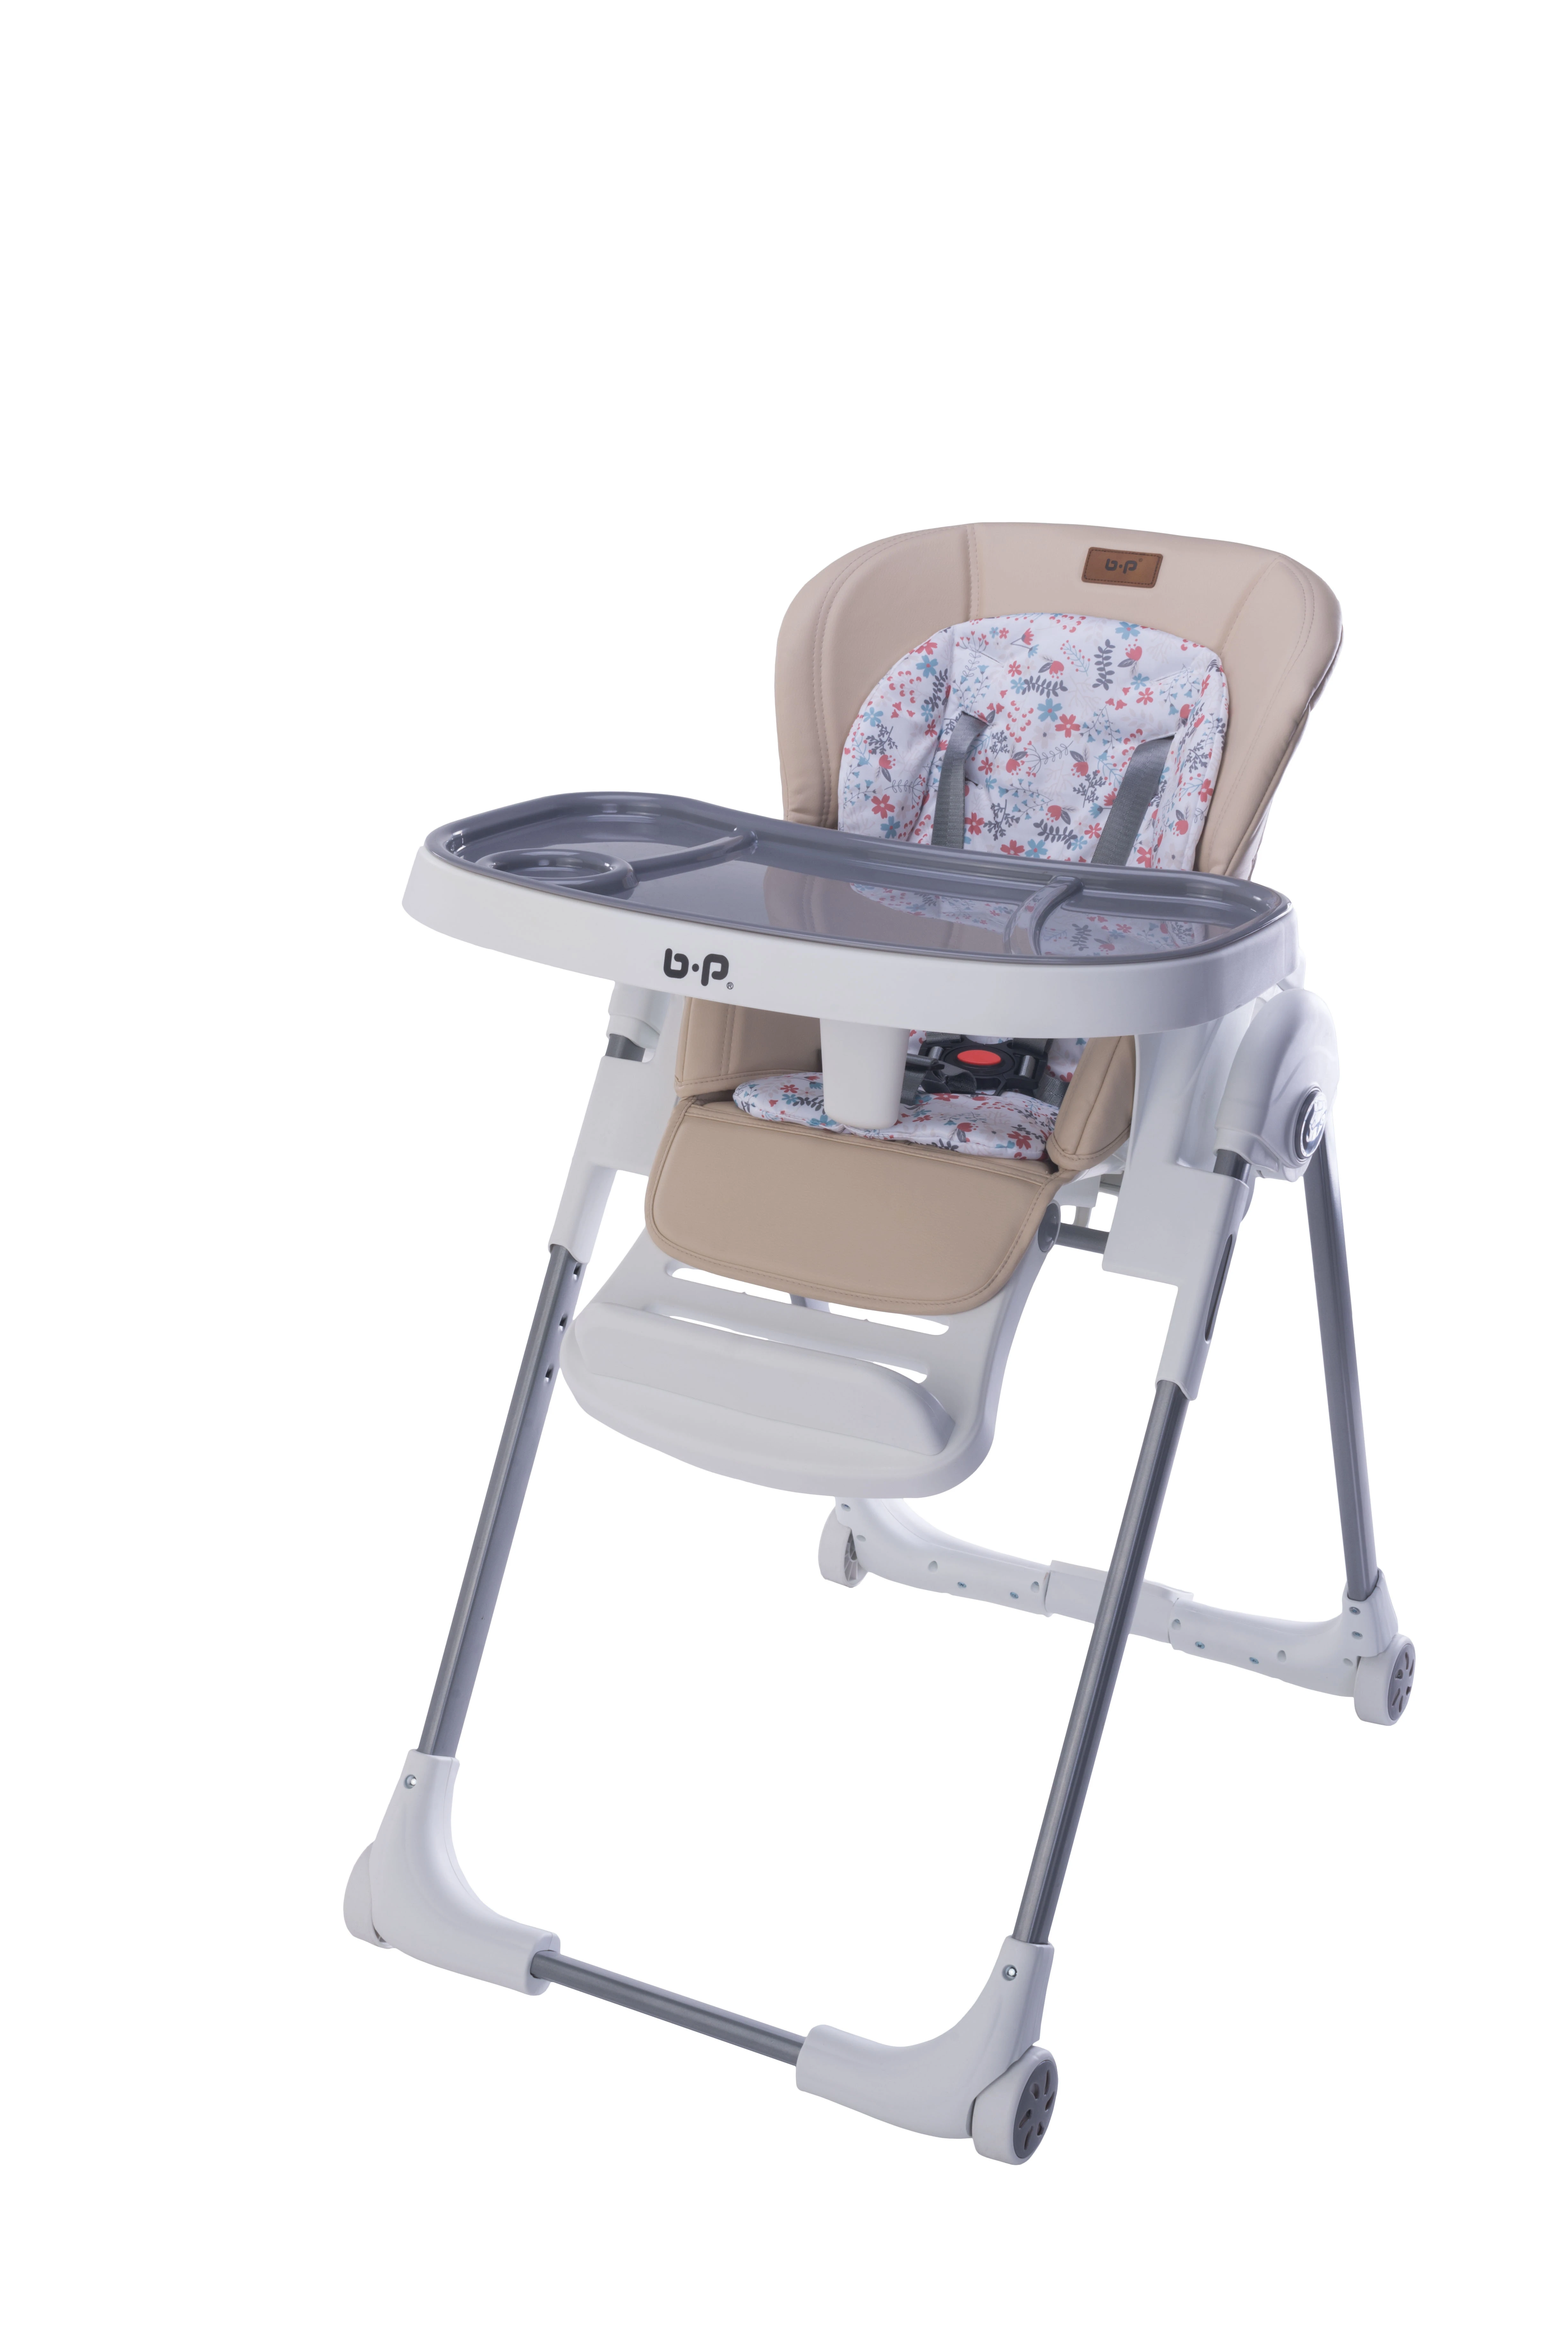 Wholesale hot selling baby feeding high chair height adjustable dinning table